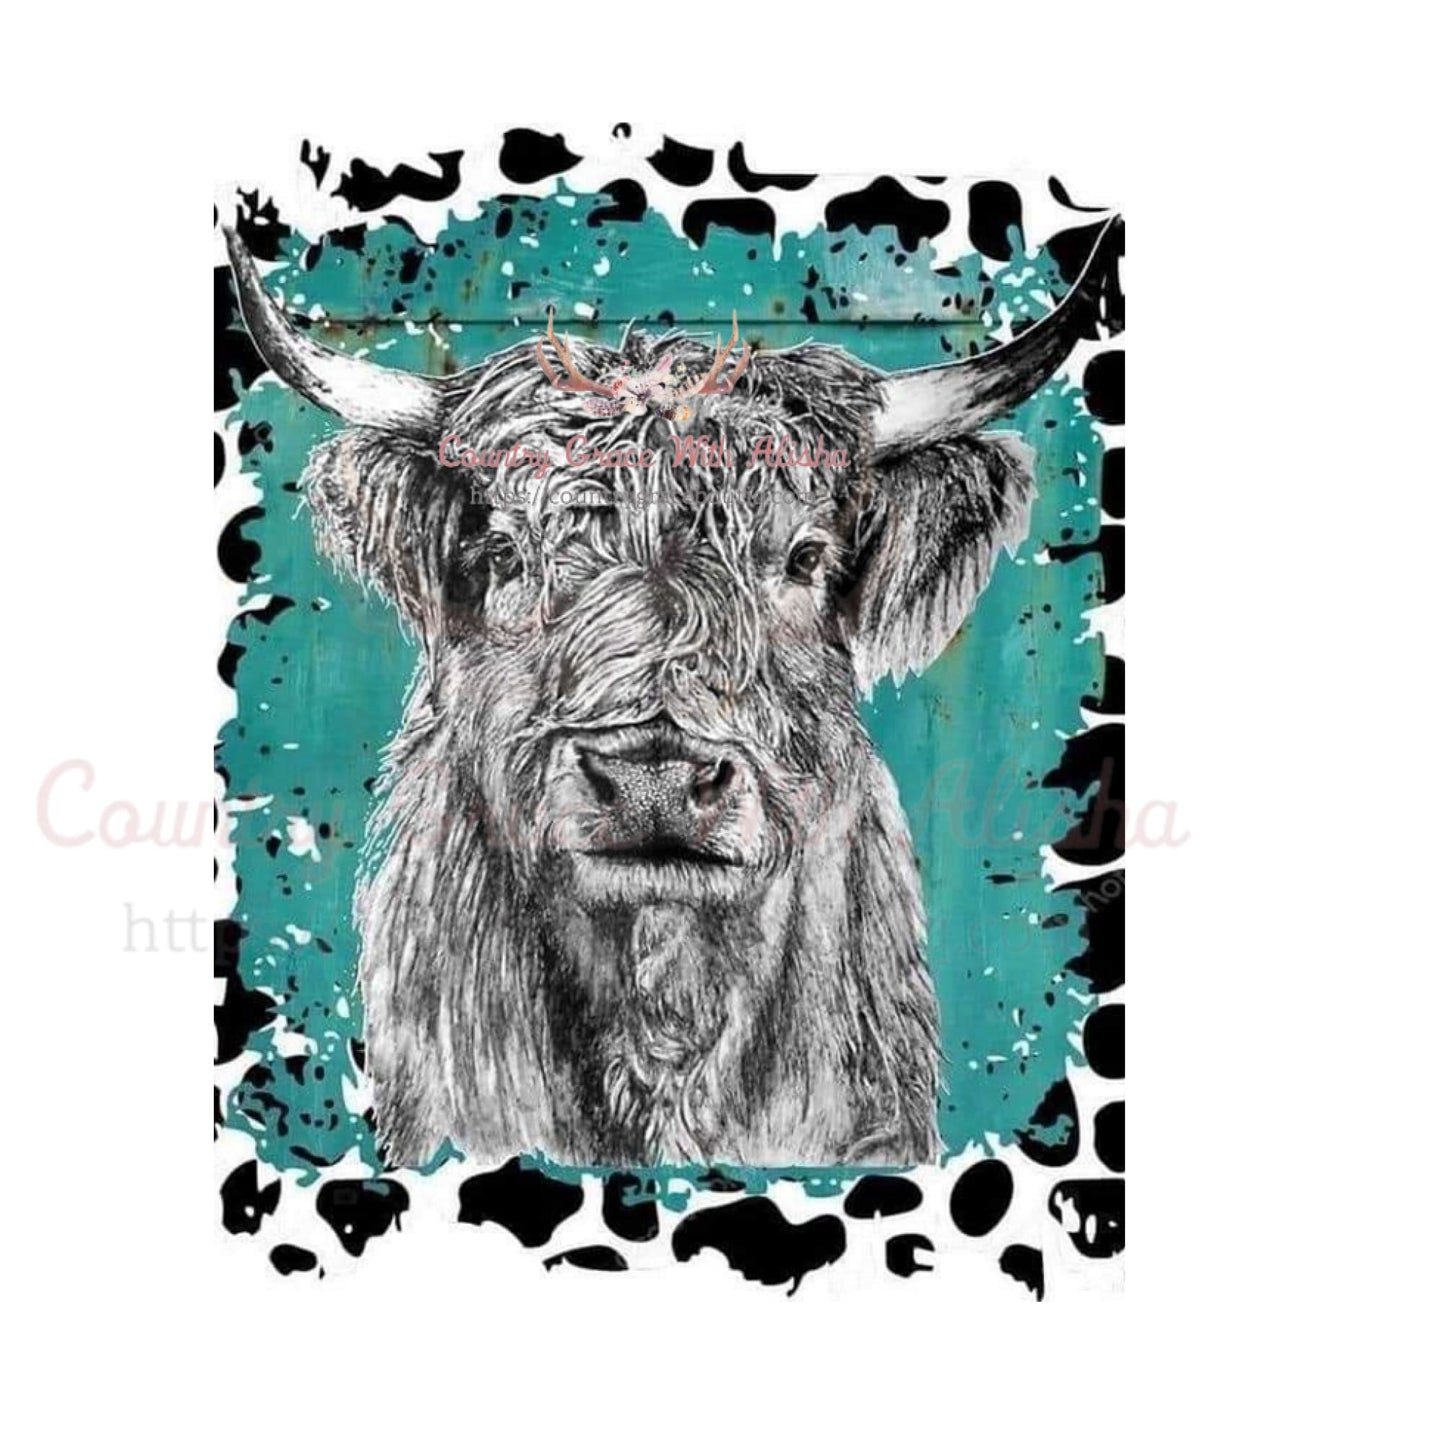 Cow Teal Sublimation Transfer - Sub $1.50 Country Grace With